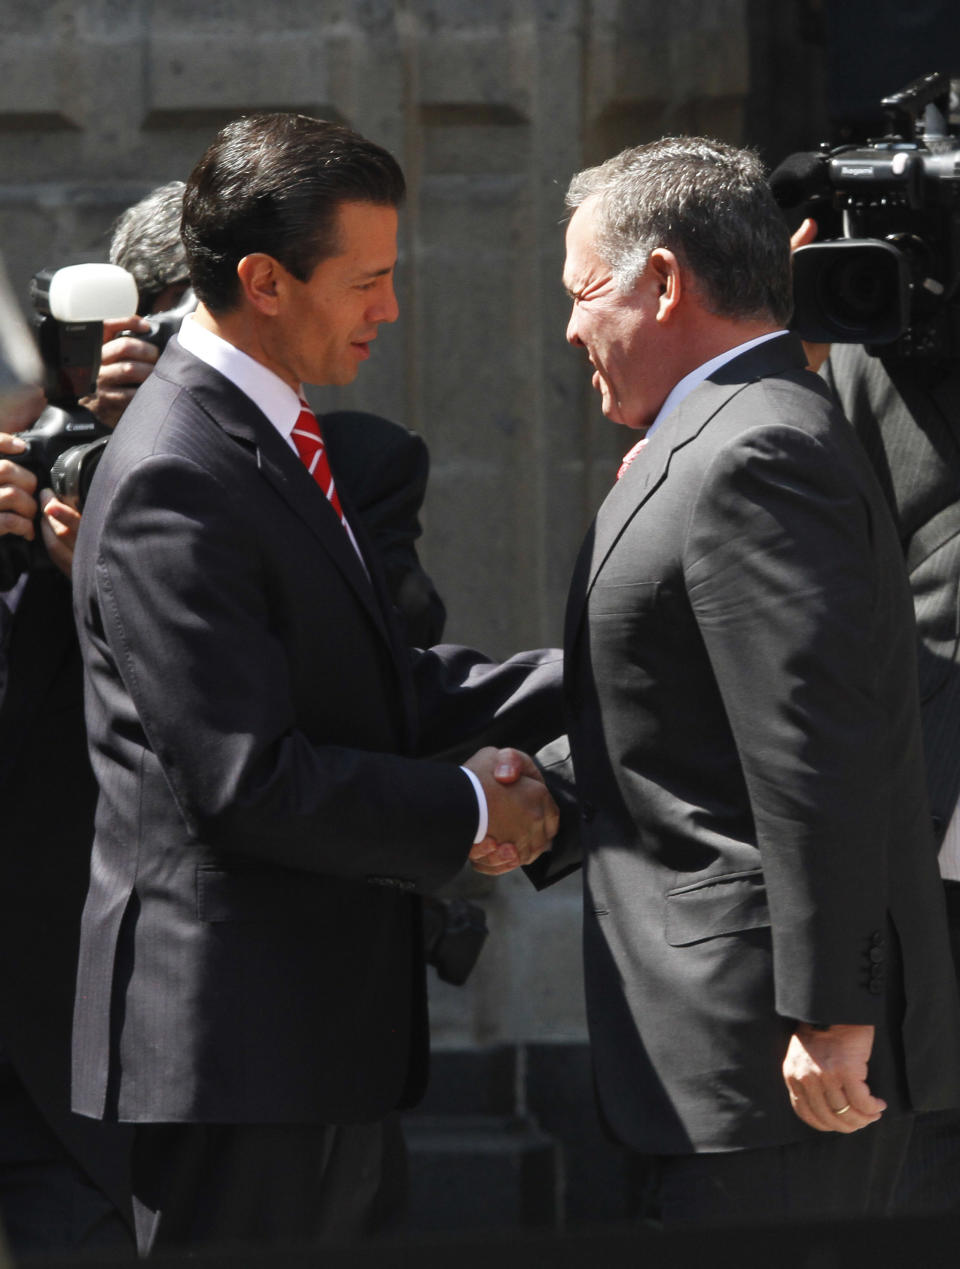 Mexico's President Enrique Pena Nieto, left, and King Abdullah II of Jordan embrace during a welcoming ceremony at the National Palace in Mexico City, Thursday, Feb. 6, 2014. King Abdullah II is in Mexico in an official visit upon invitation from the President and will also meet with political and economic leaders to discuss means of strengthening bilateral relations. (AP Photo/Marco Ugarte)